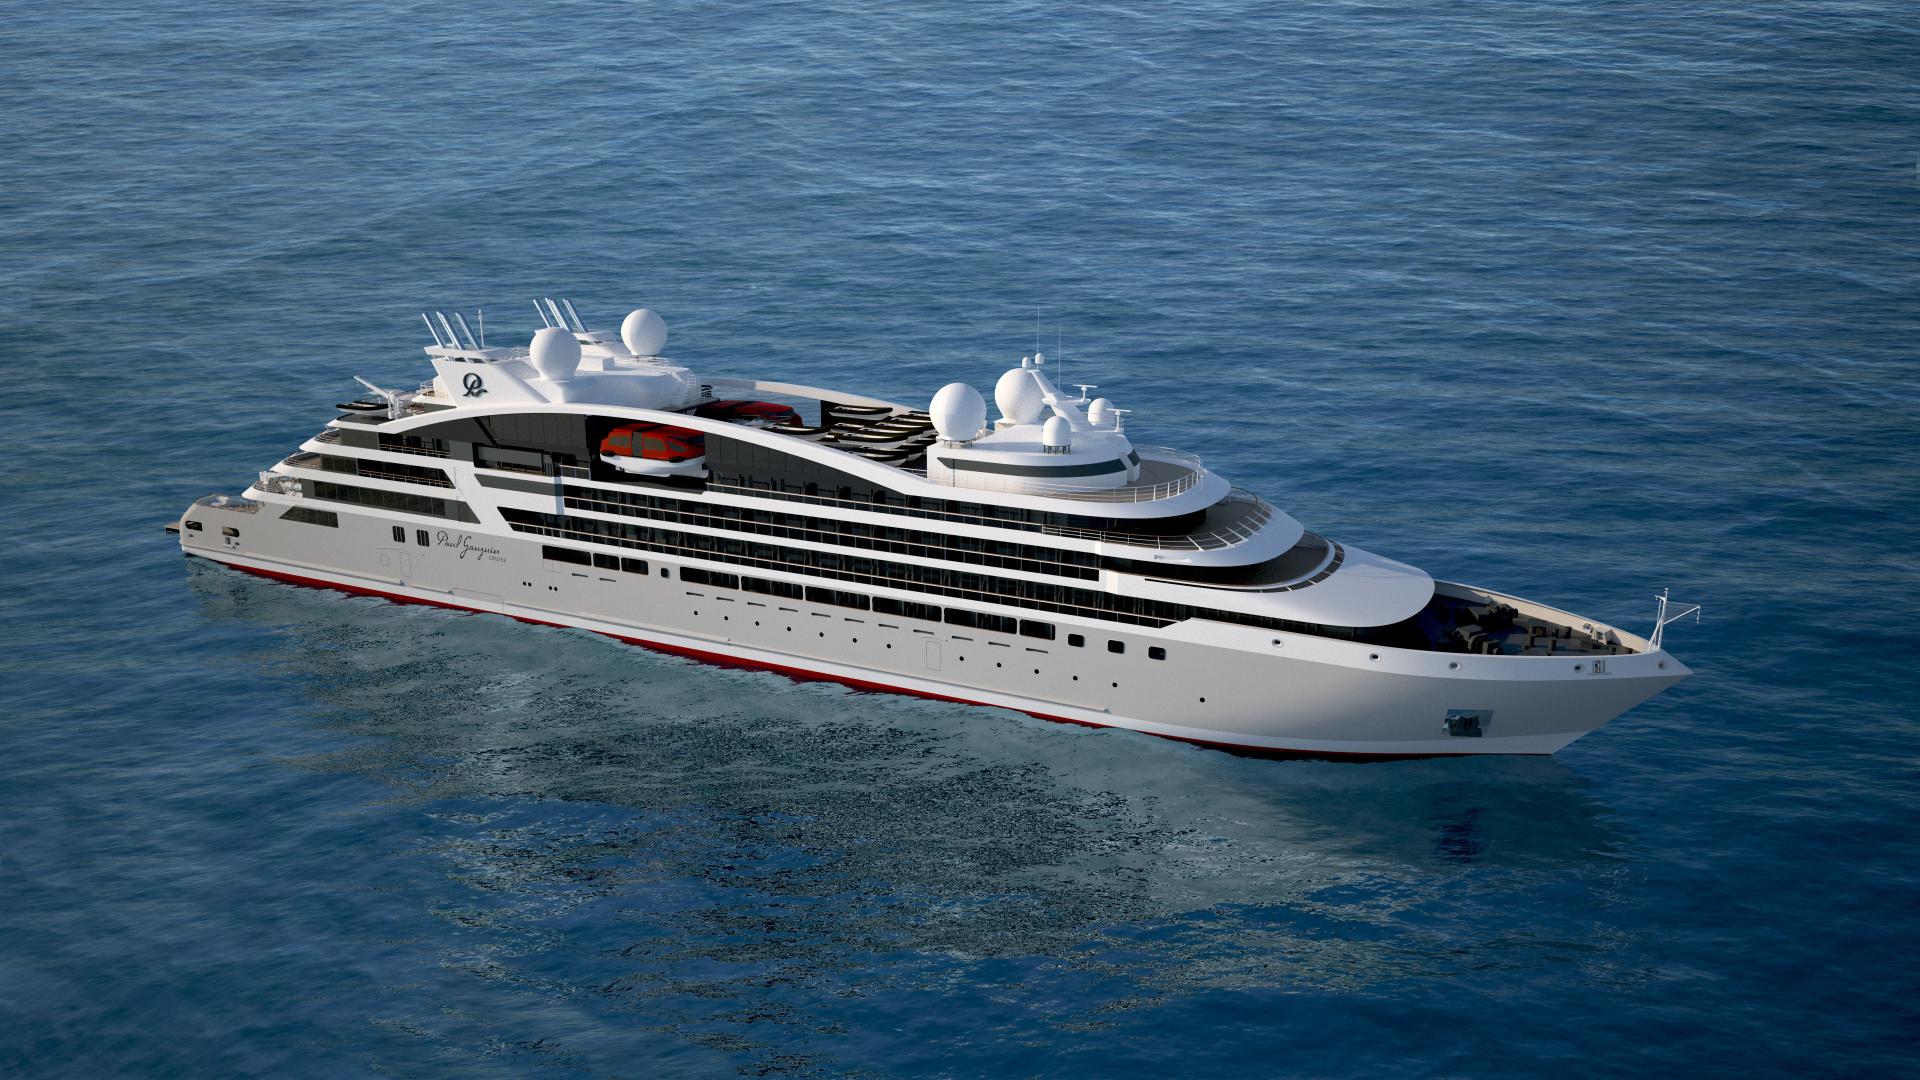 Vard: signed the contract for the 2 new cruise ships for Ponant